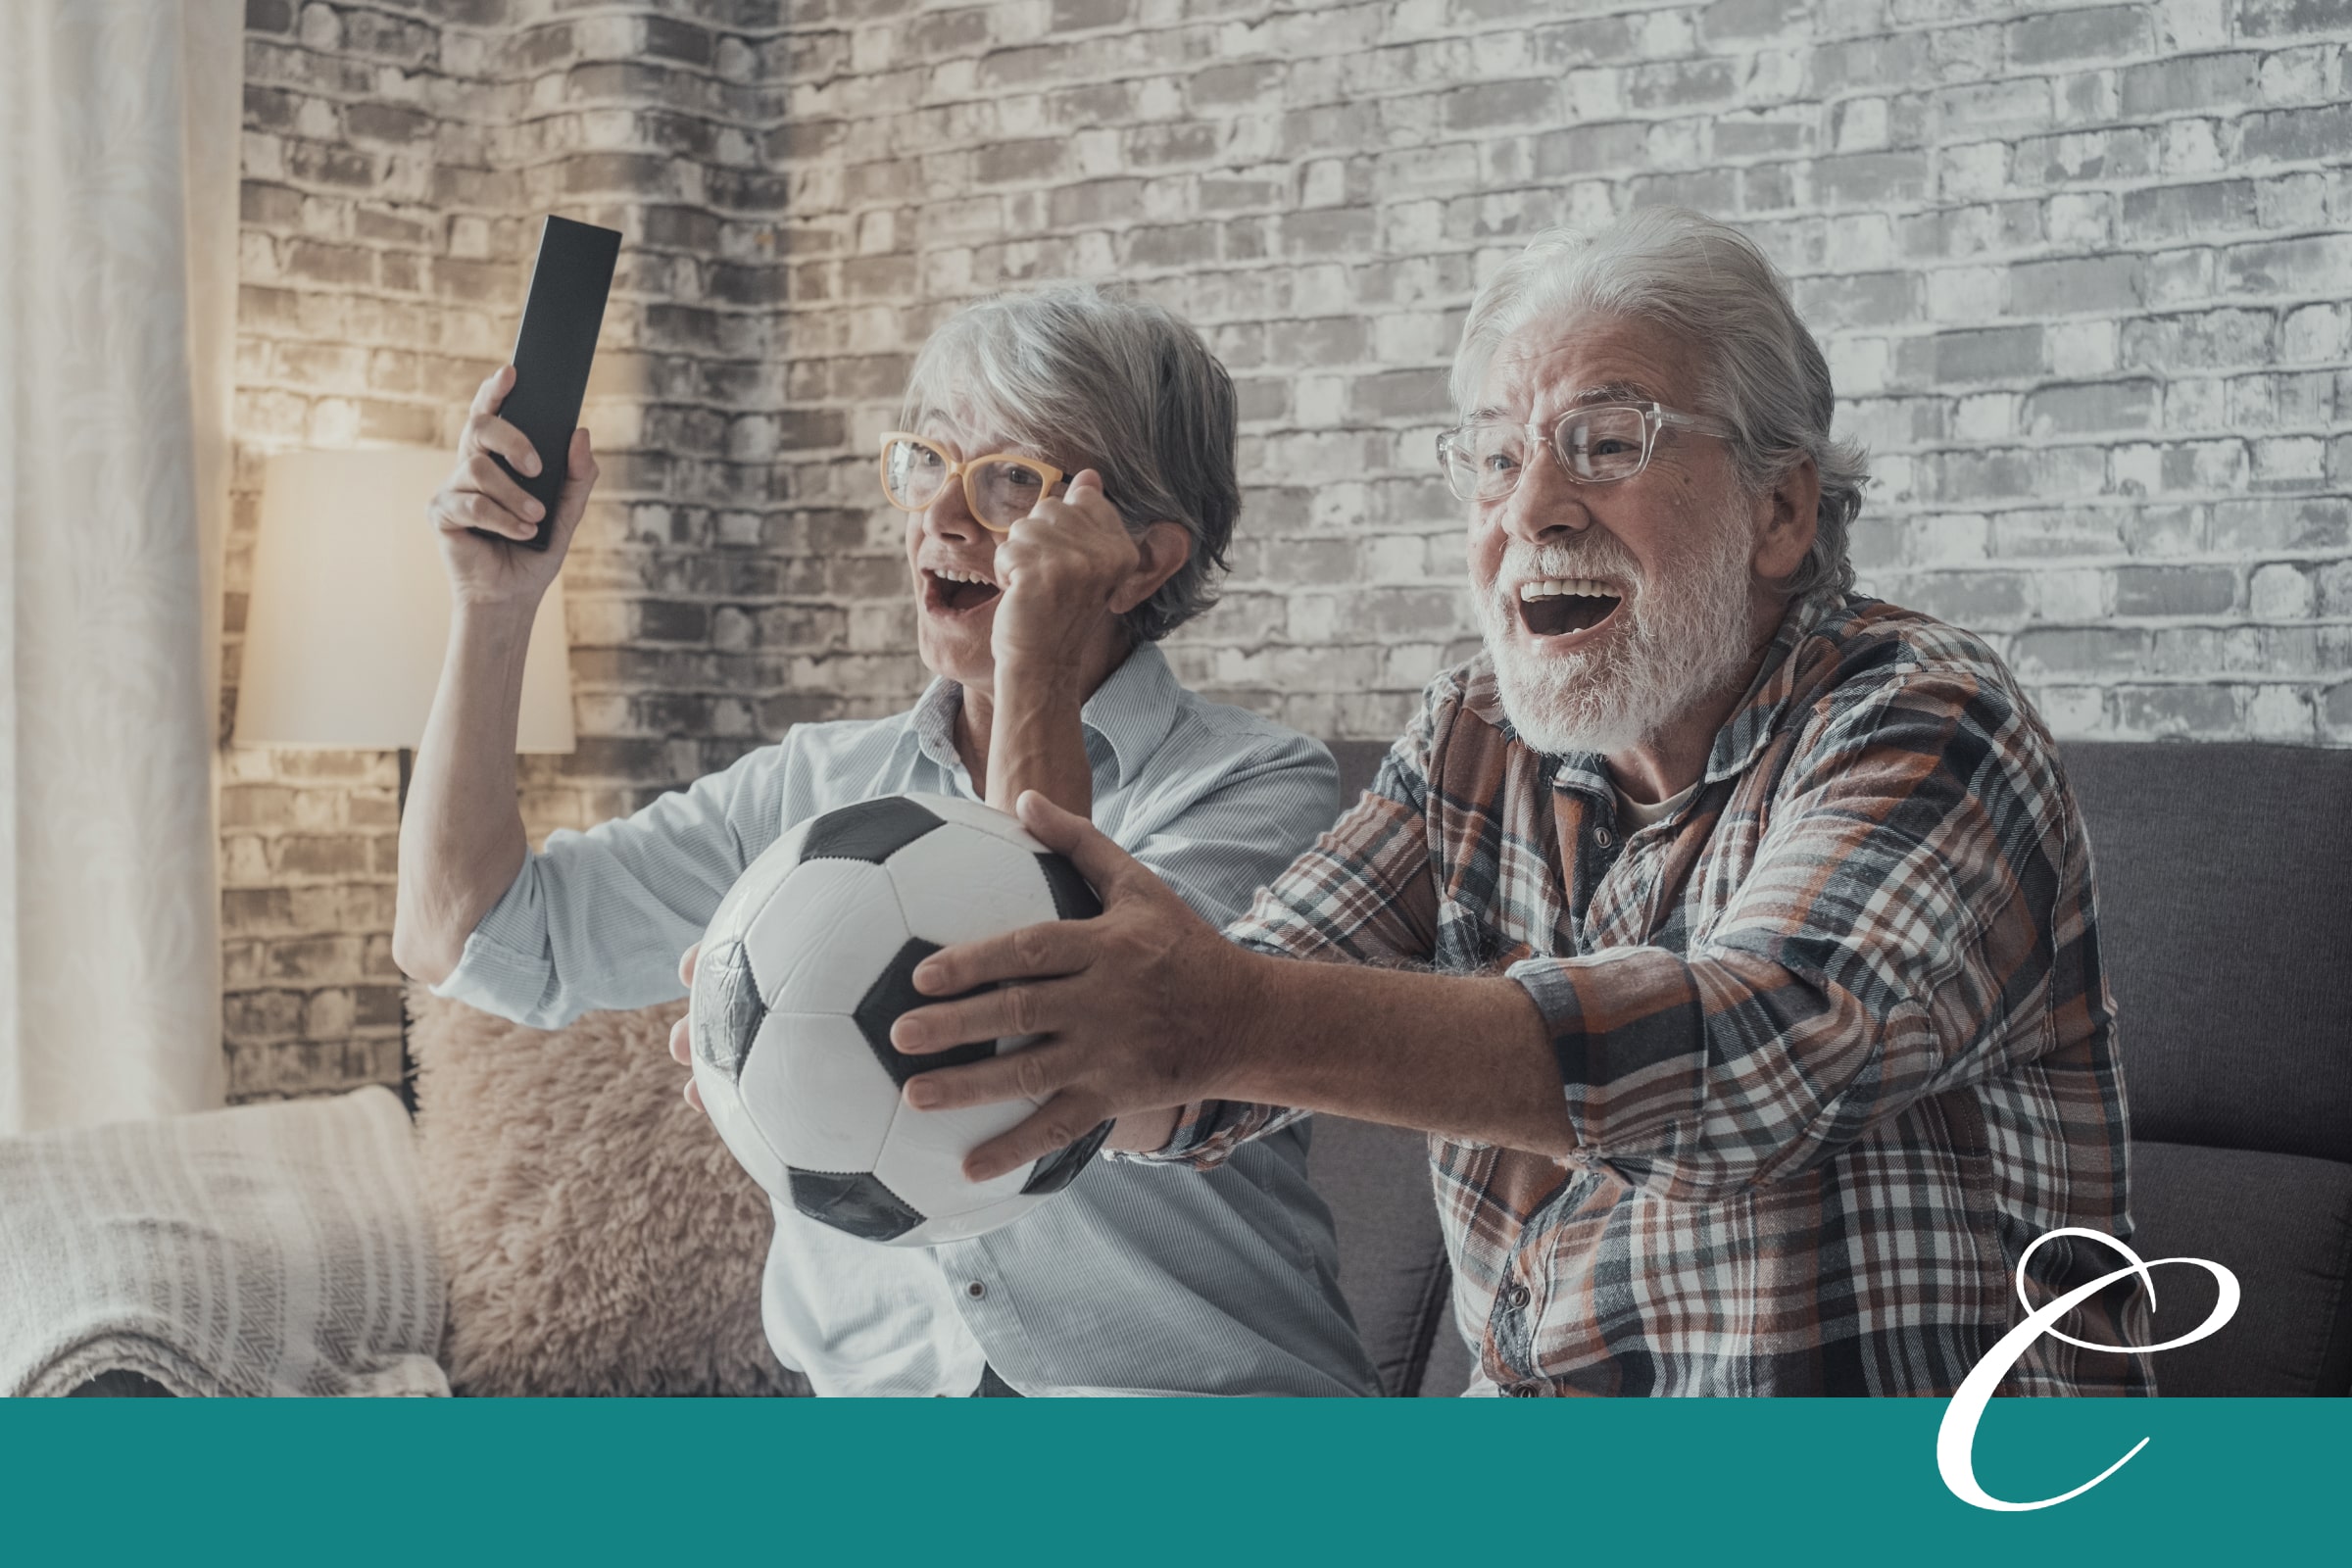 Discover five retirement goals that are worthwhile to pursue this year to give you greater financial security and peace of mind.